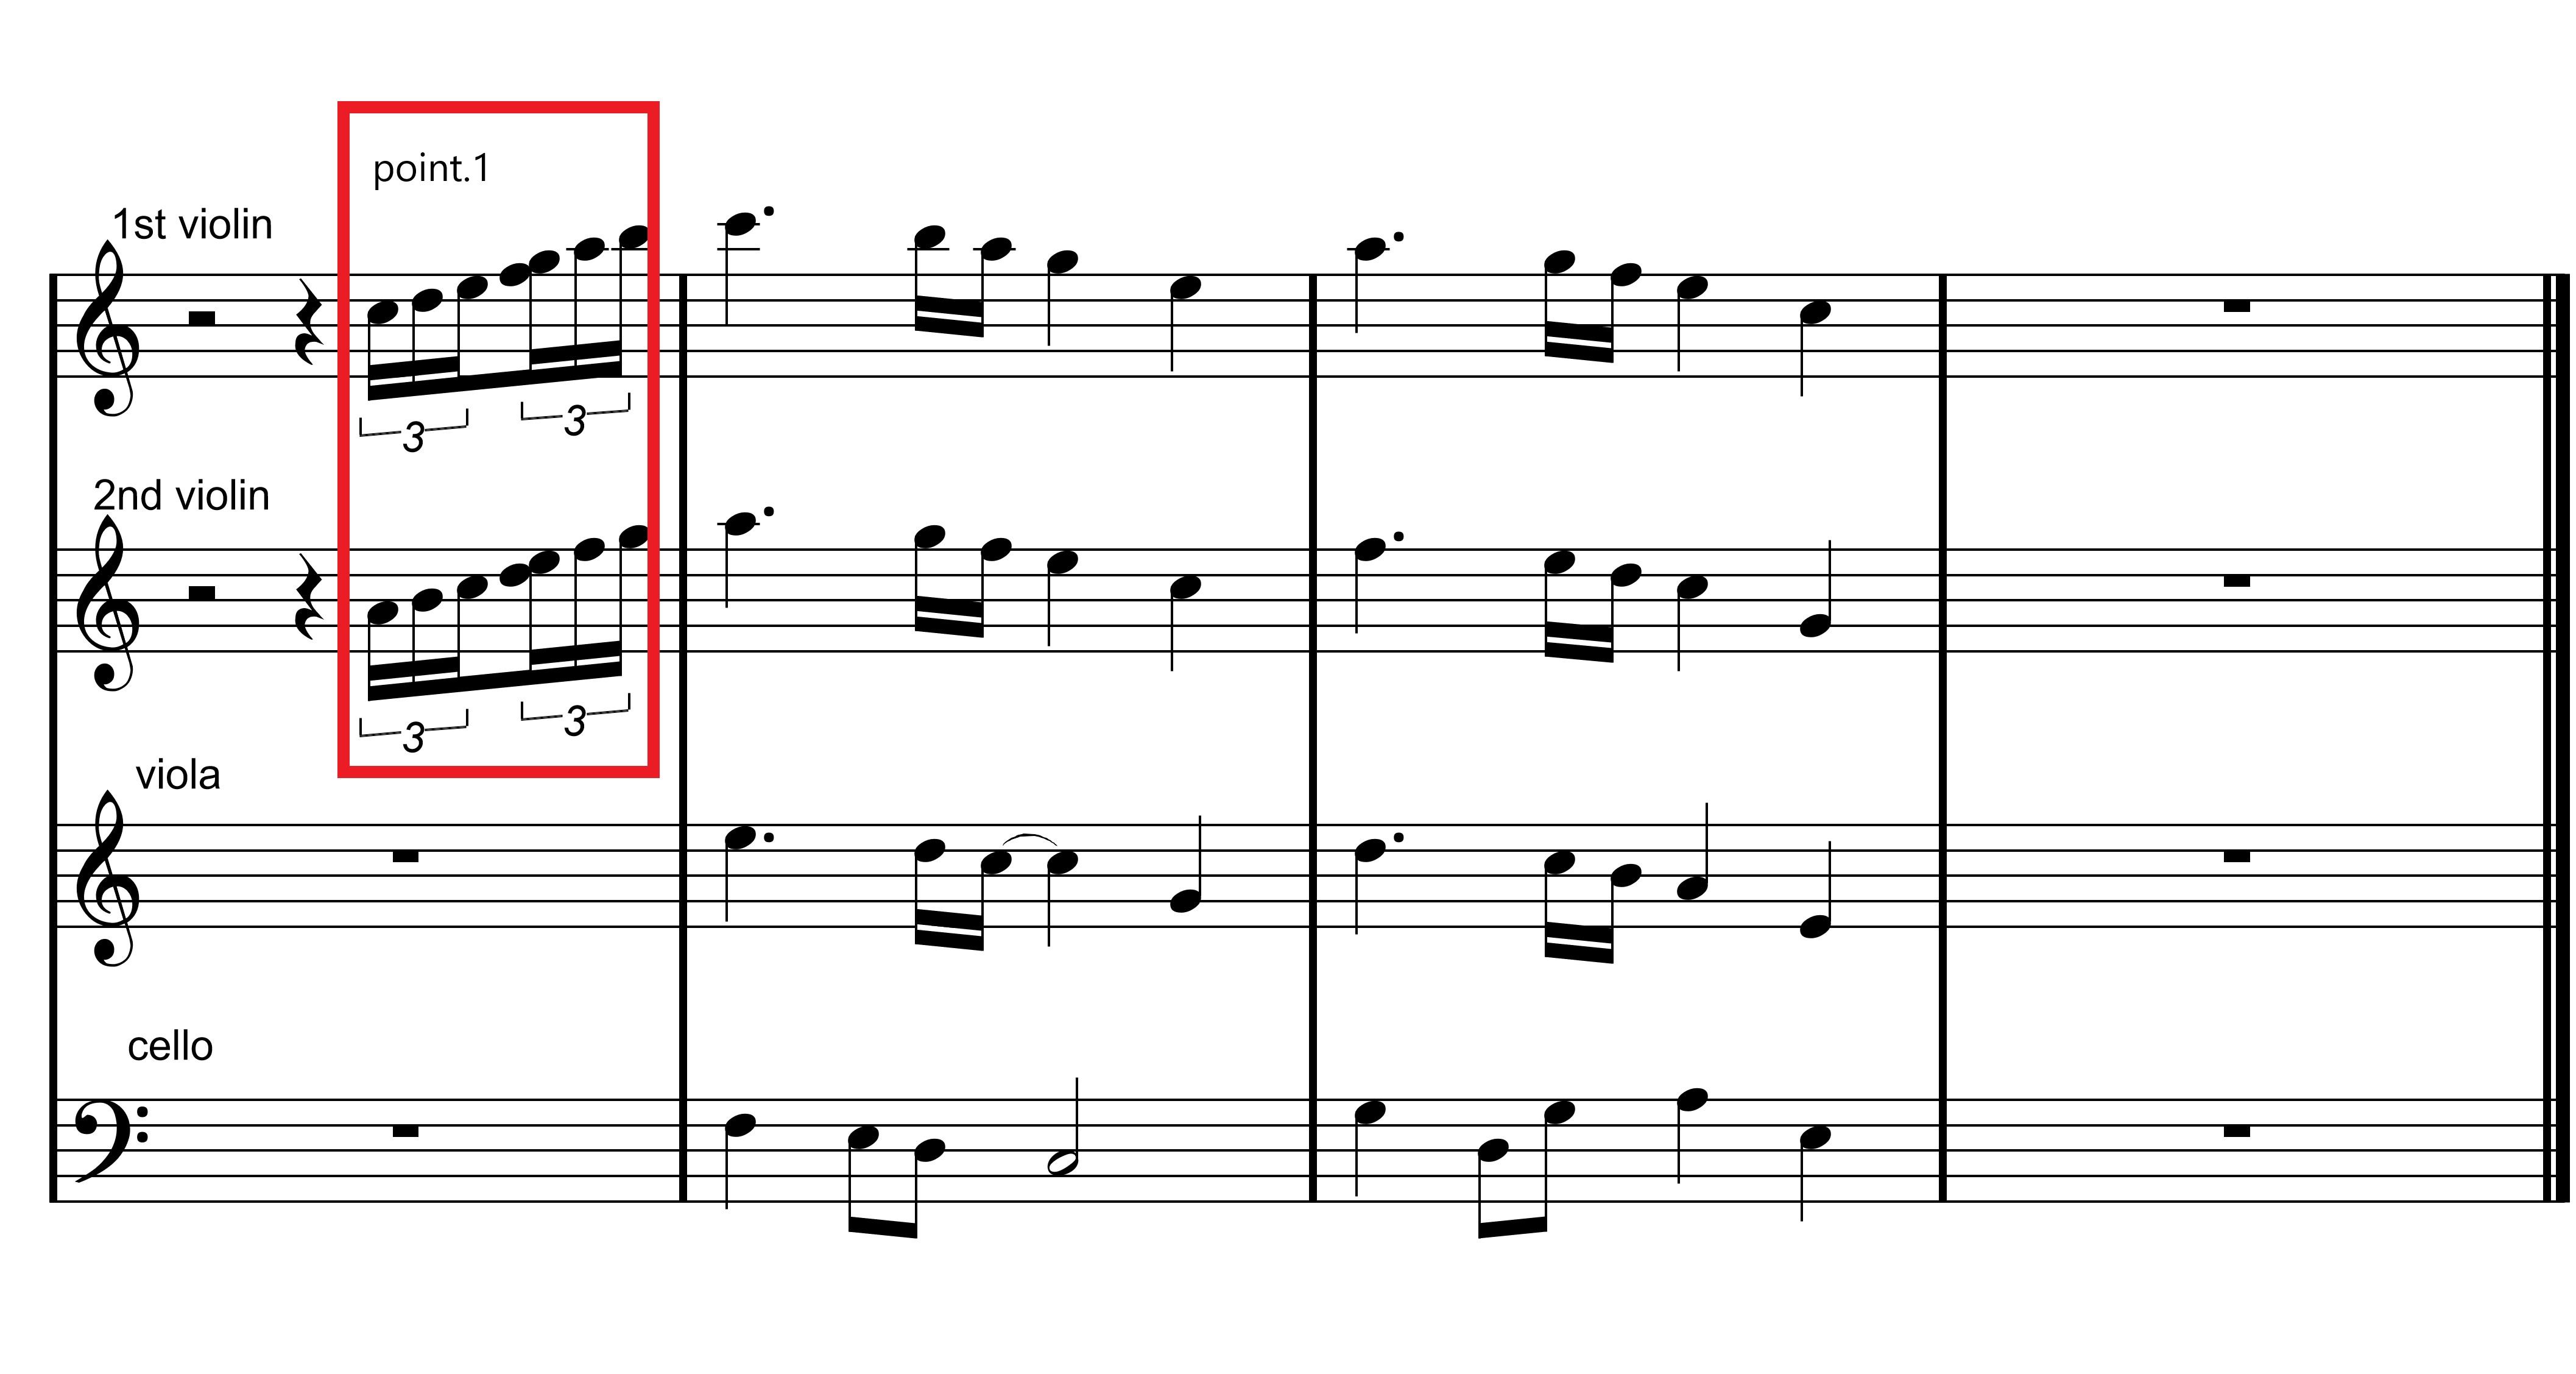 strings2.point1